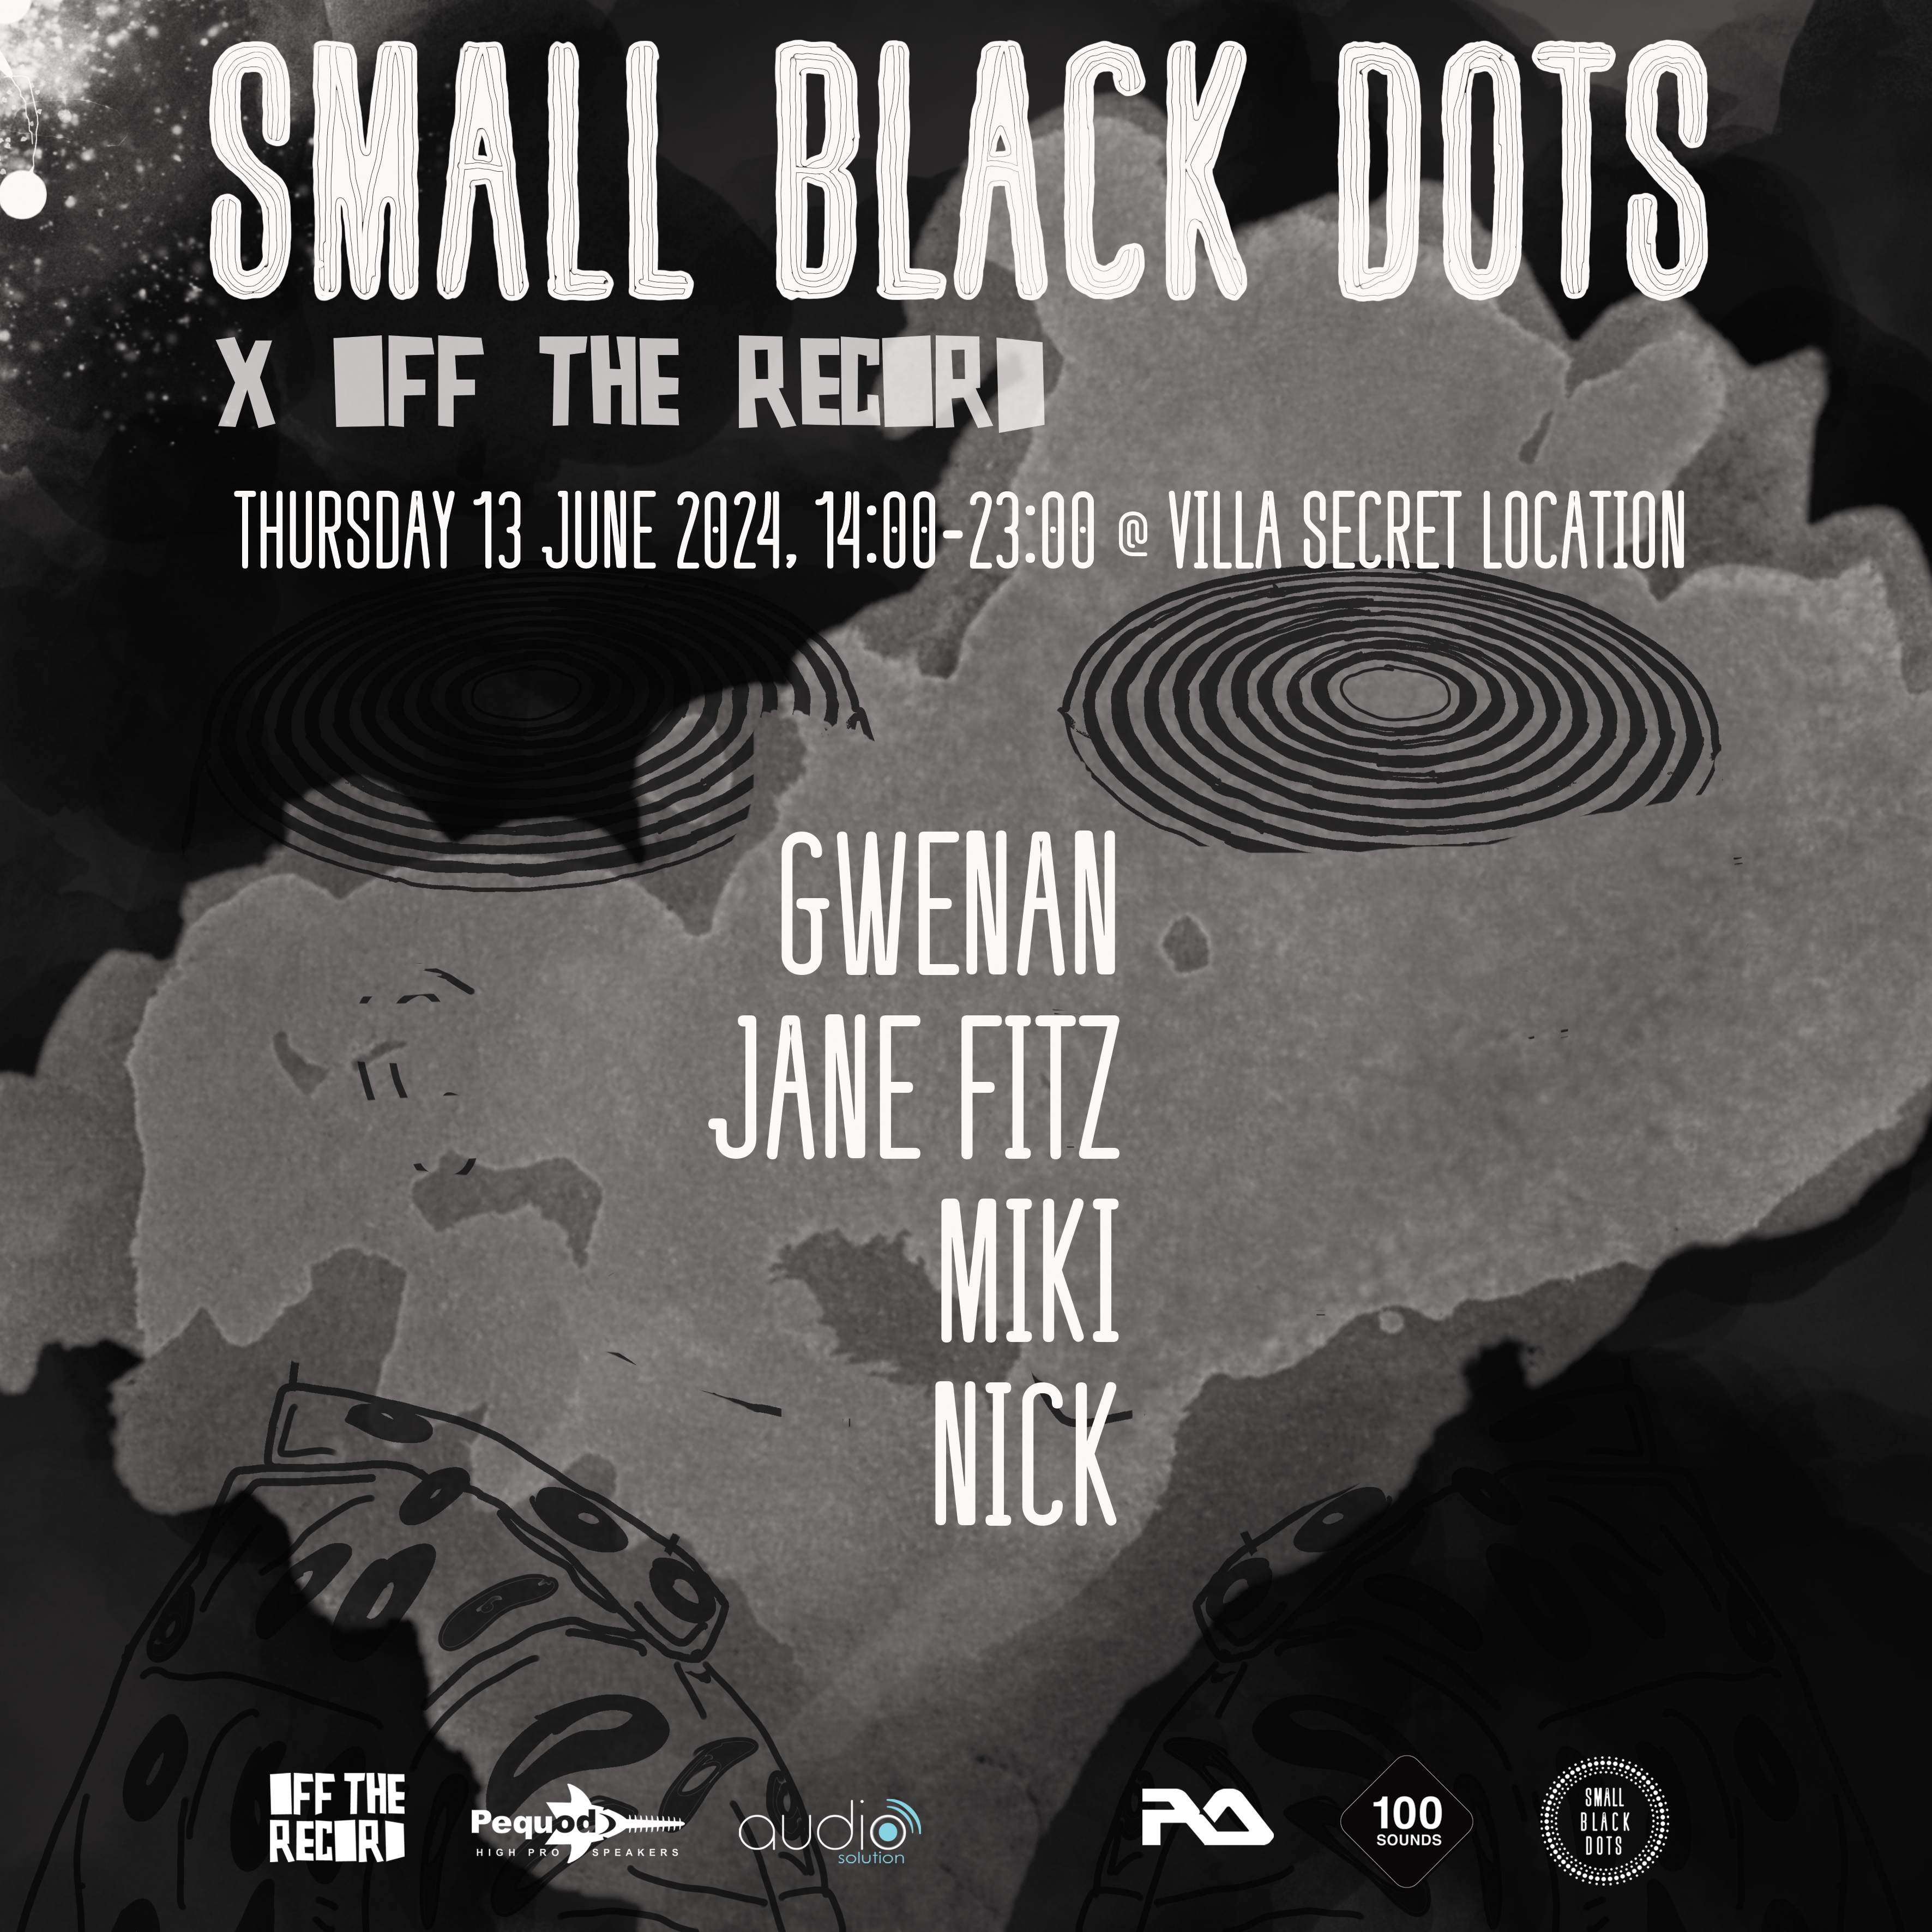 Small Black Dots X OFF The Record - フライヤー表